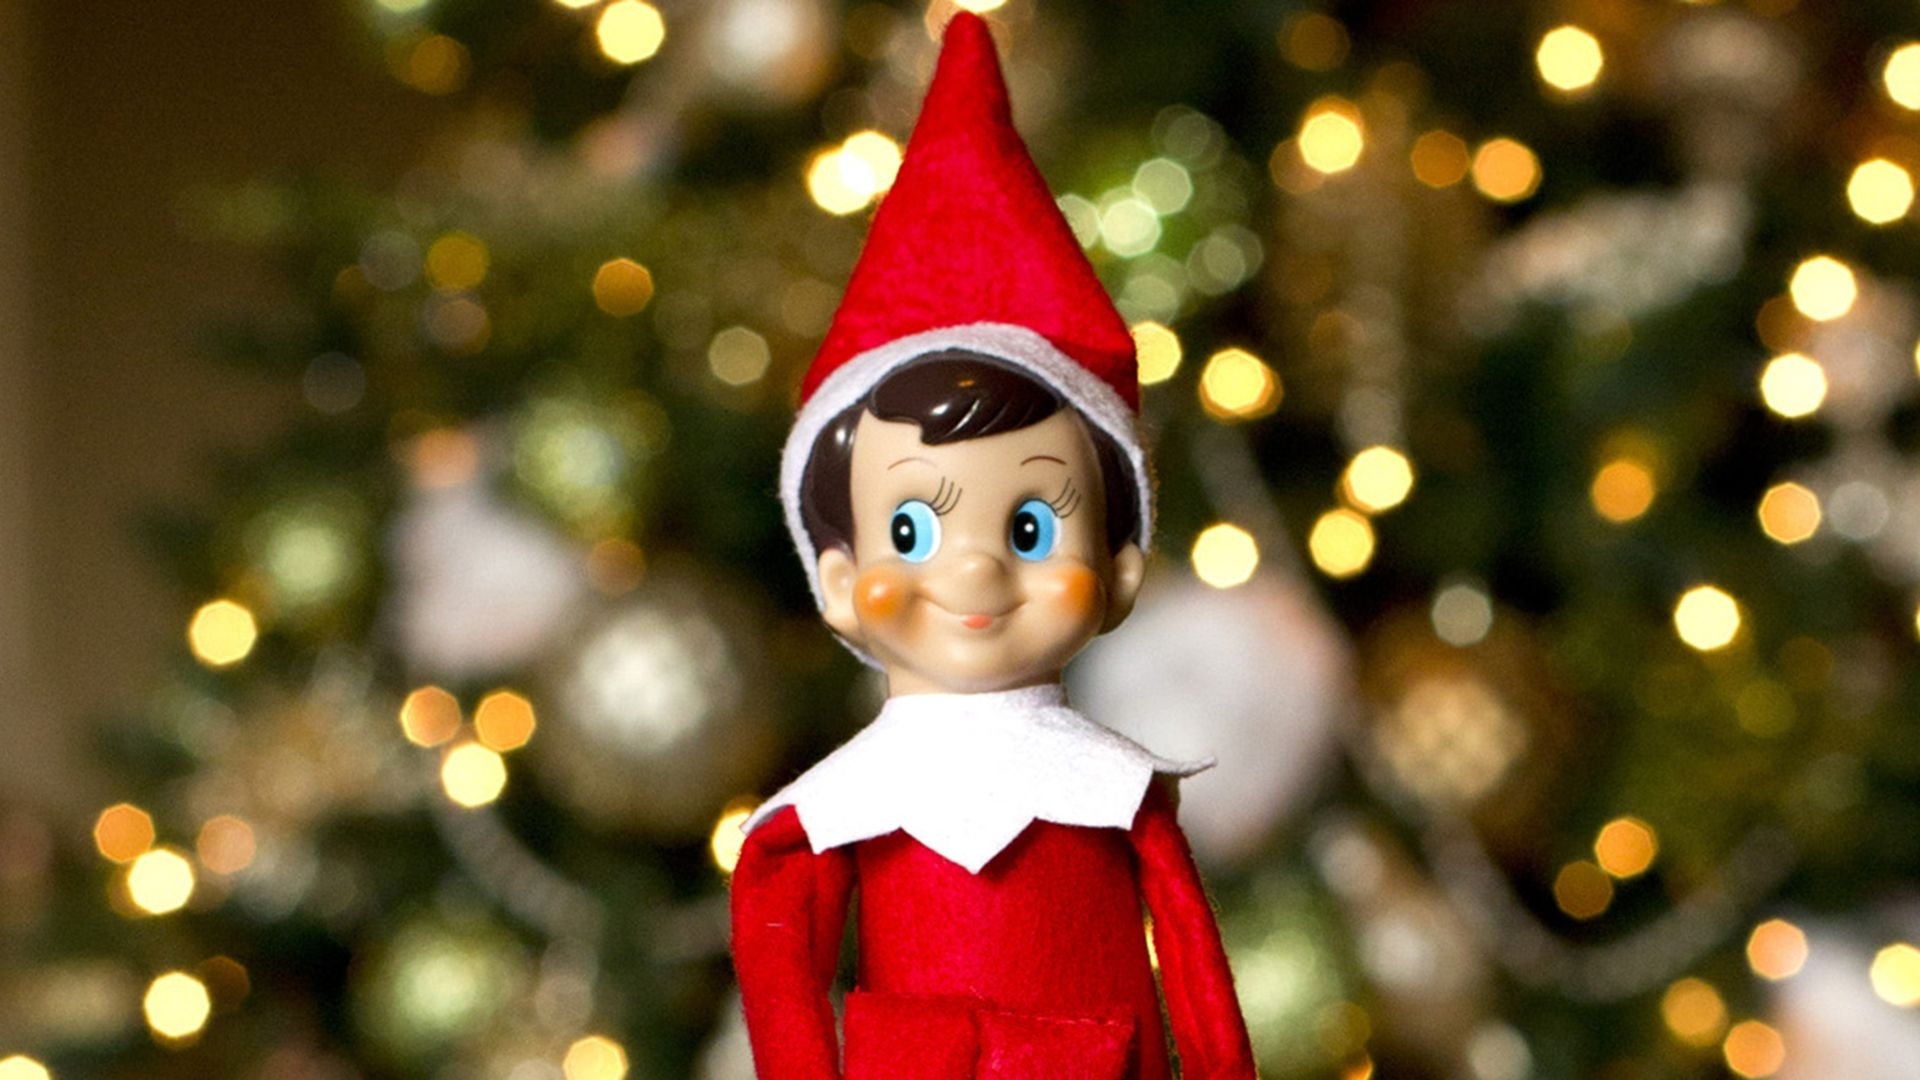 the elf on the shelf wallpapers - wallpaper cave